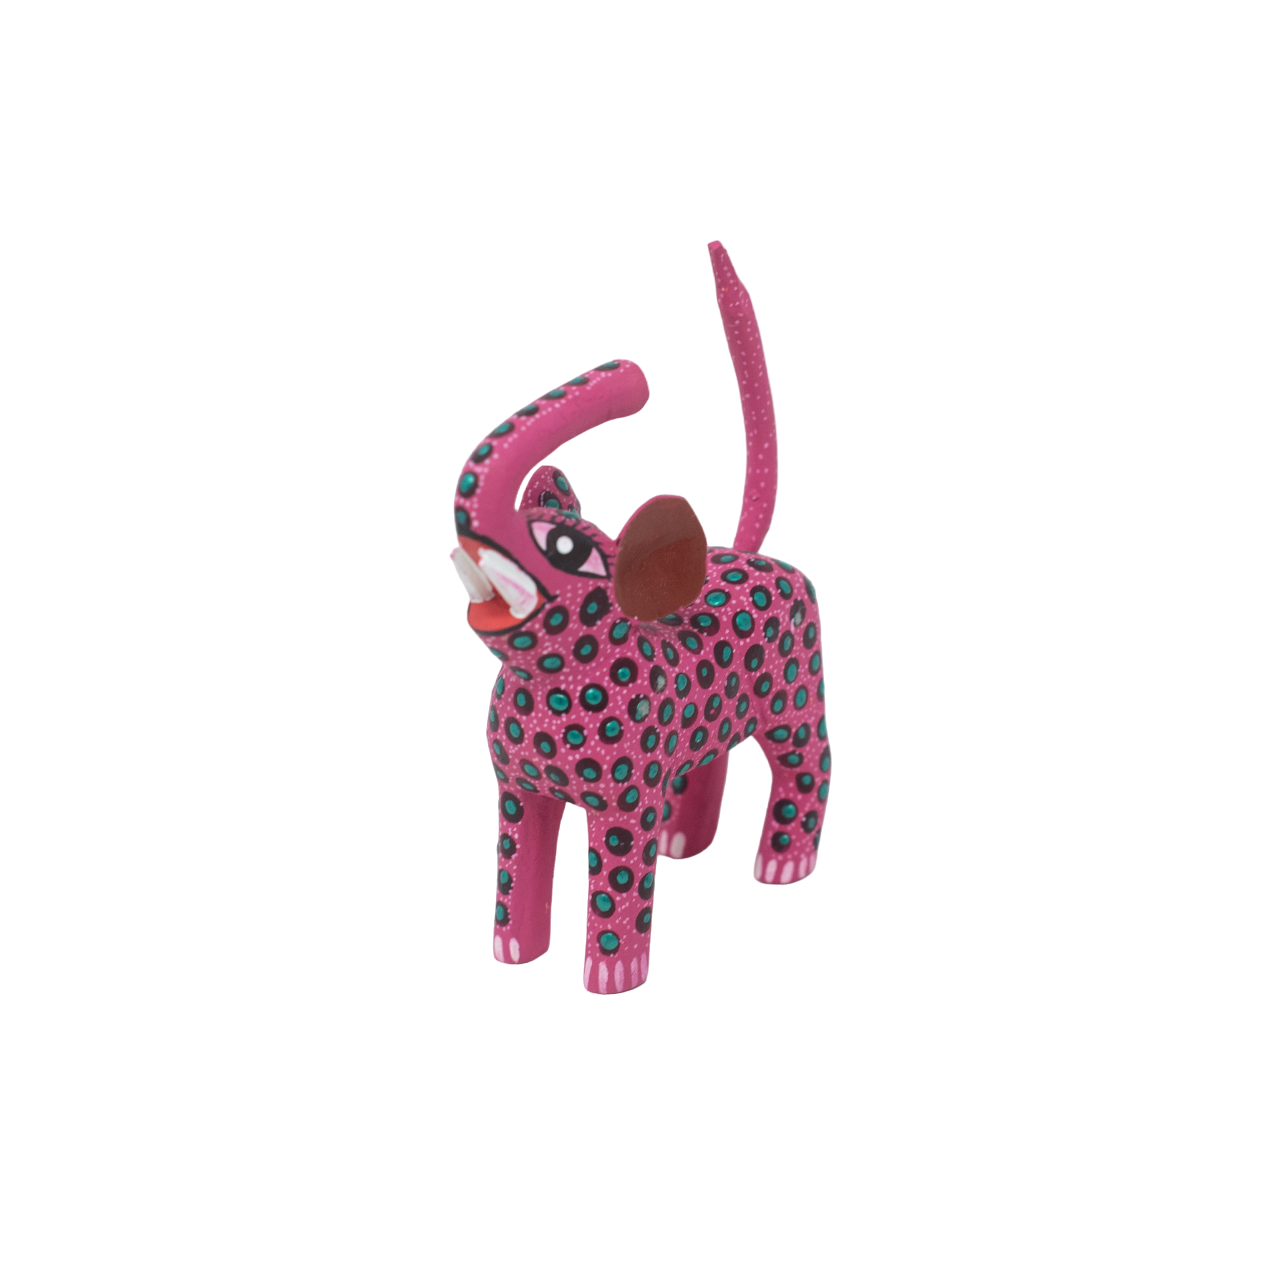 Handcarved Oaxacan Alebrije, Pink Elephant with Green Dots, Traditional Mexican Folk Art